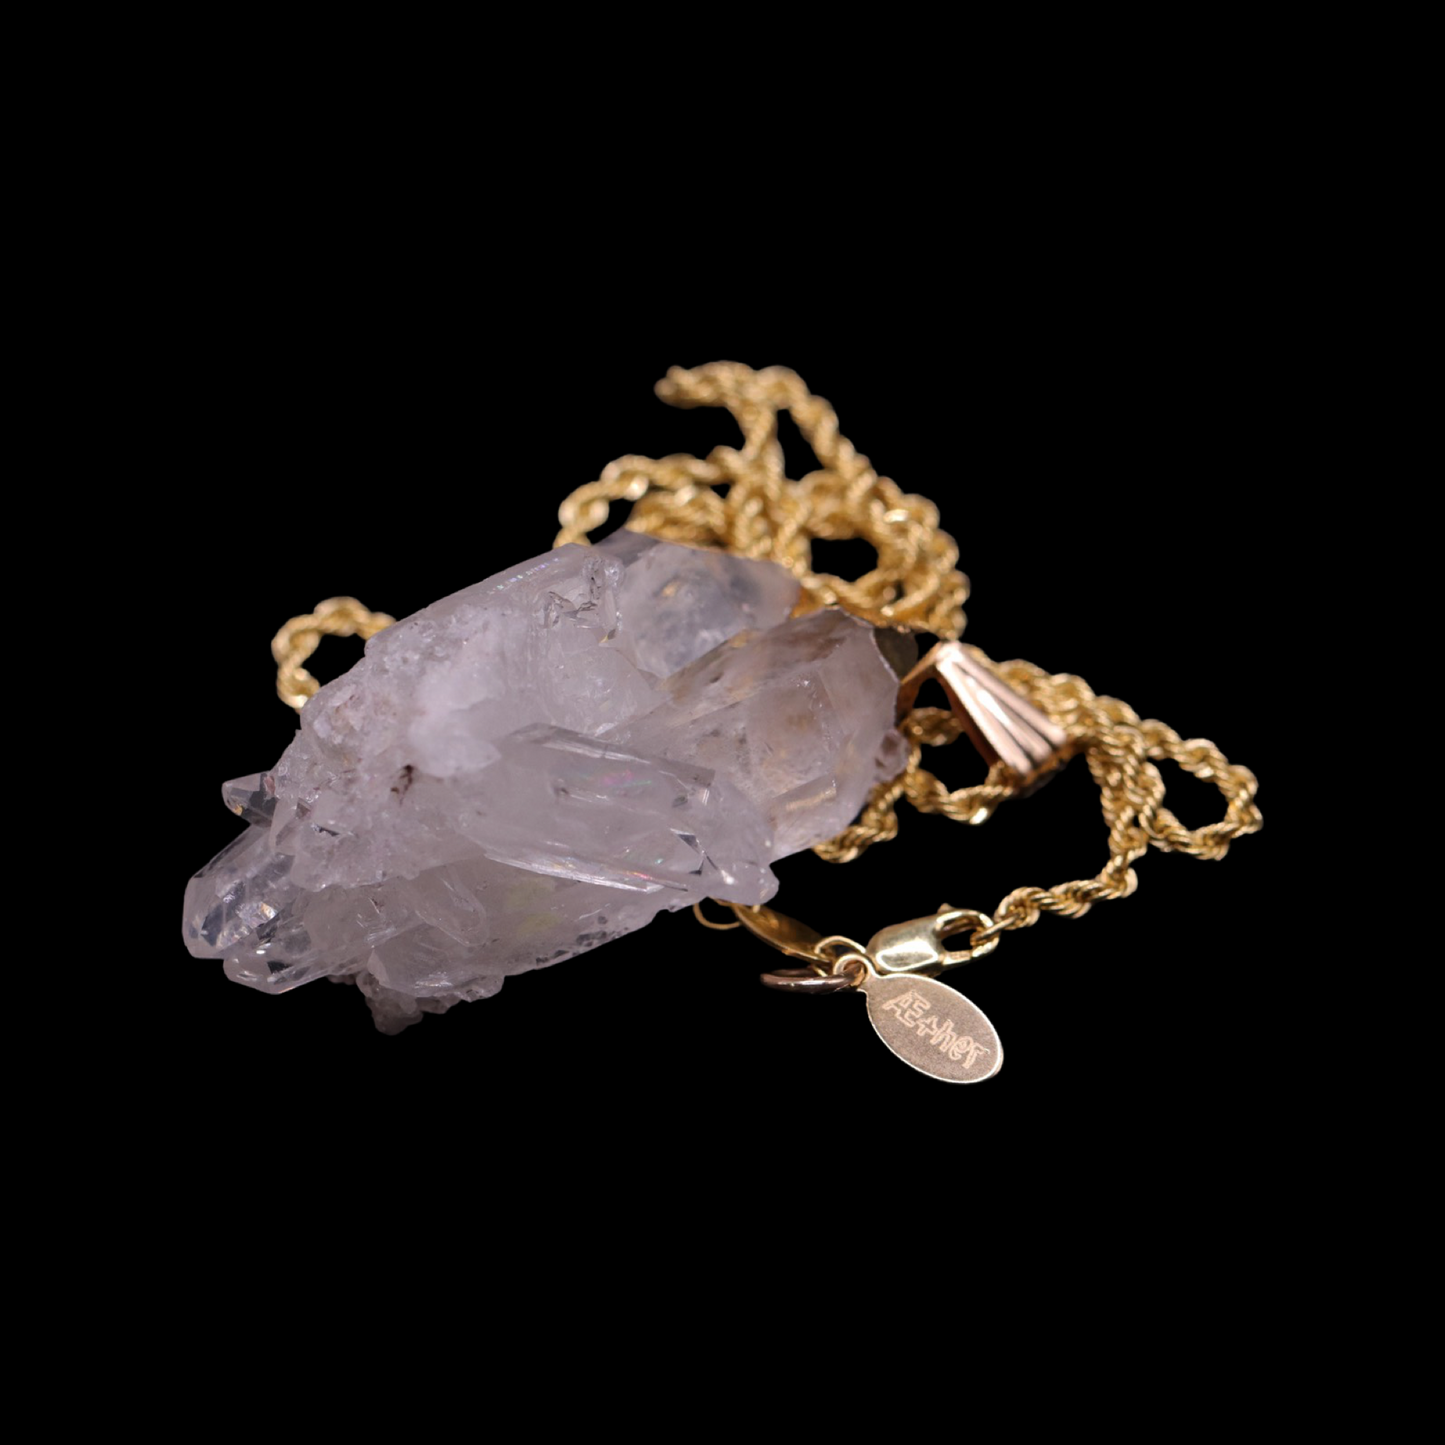 Raw Clear Quartz Cluster on Rope